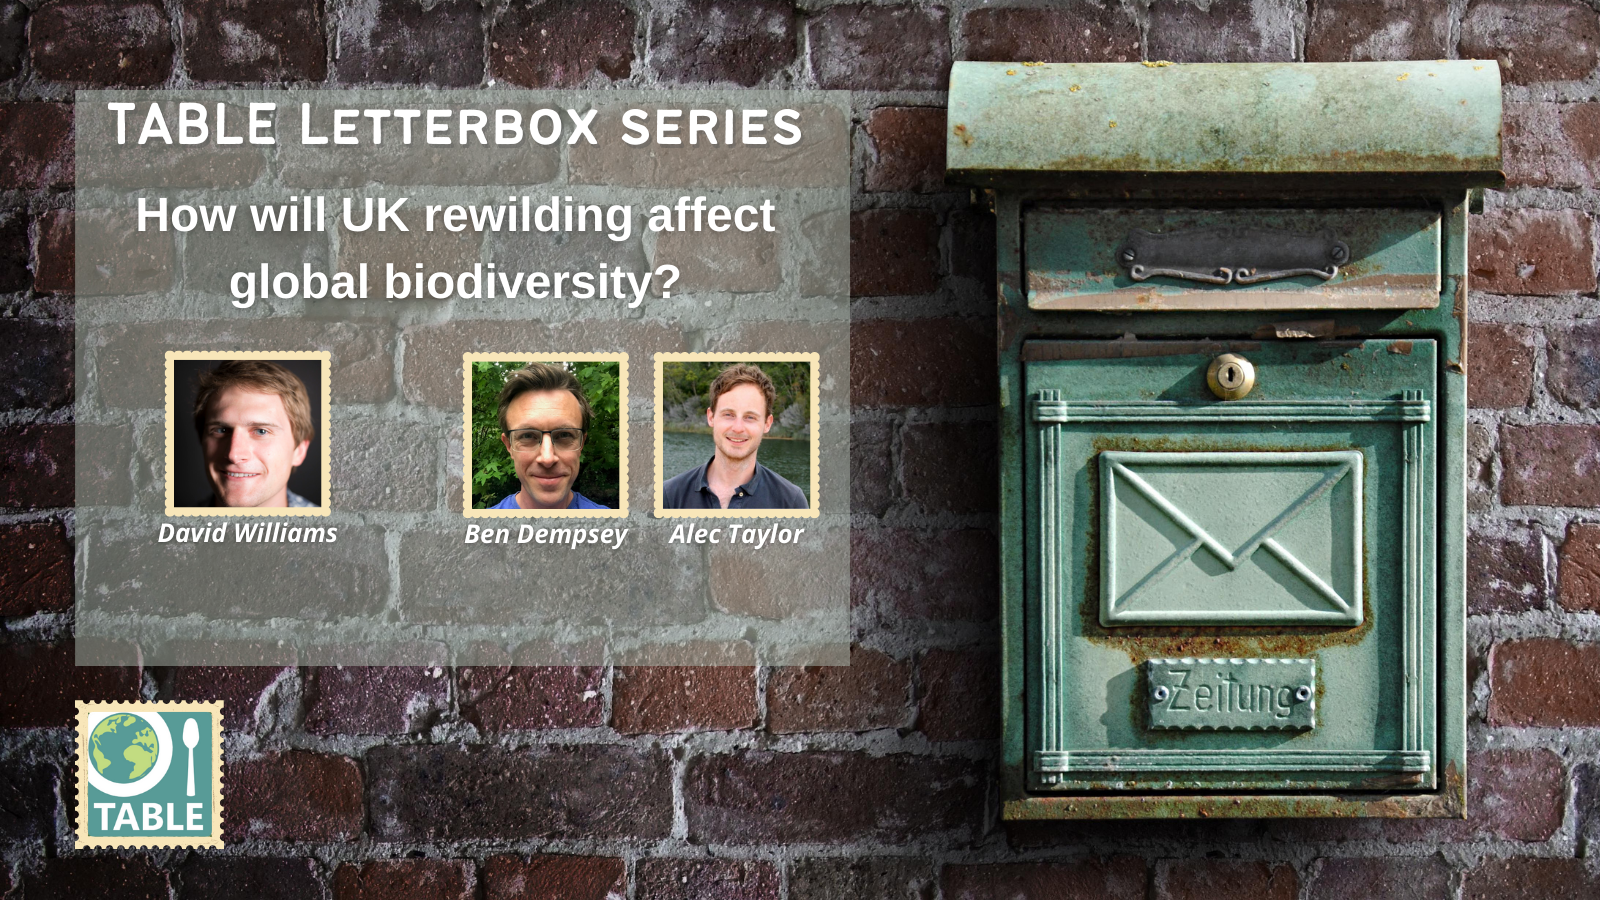 A flyer advertising the publication of a new edition of the Table letterbox series featuring David Williams and Benedict Dempsey & Alec Taylor on rewilding in the UK. The background is a green metal letterbox set into a brick wall. 